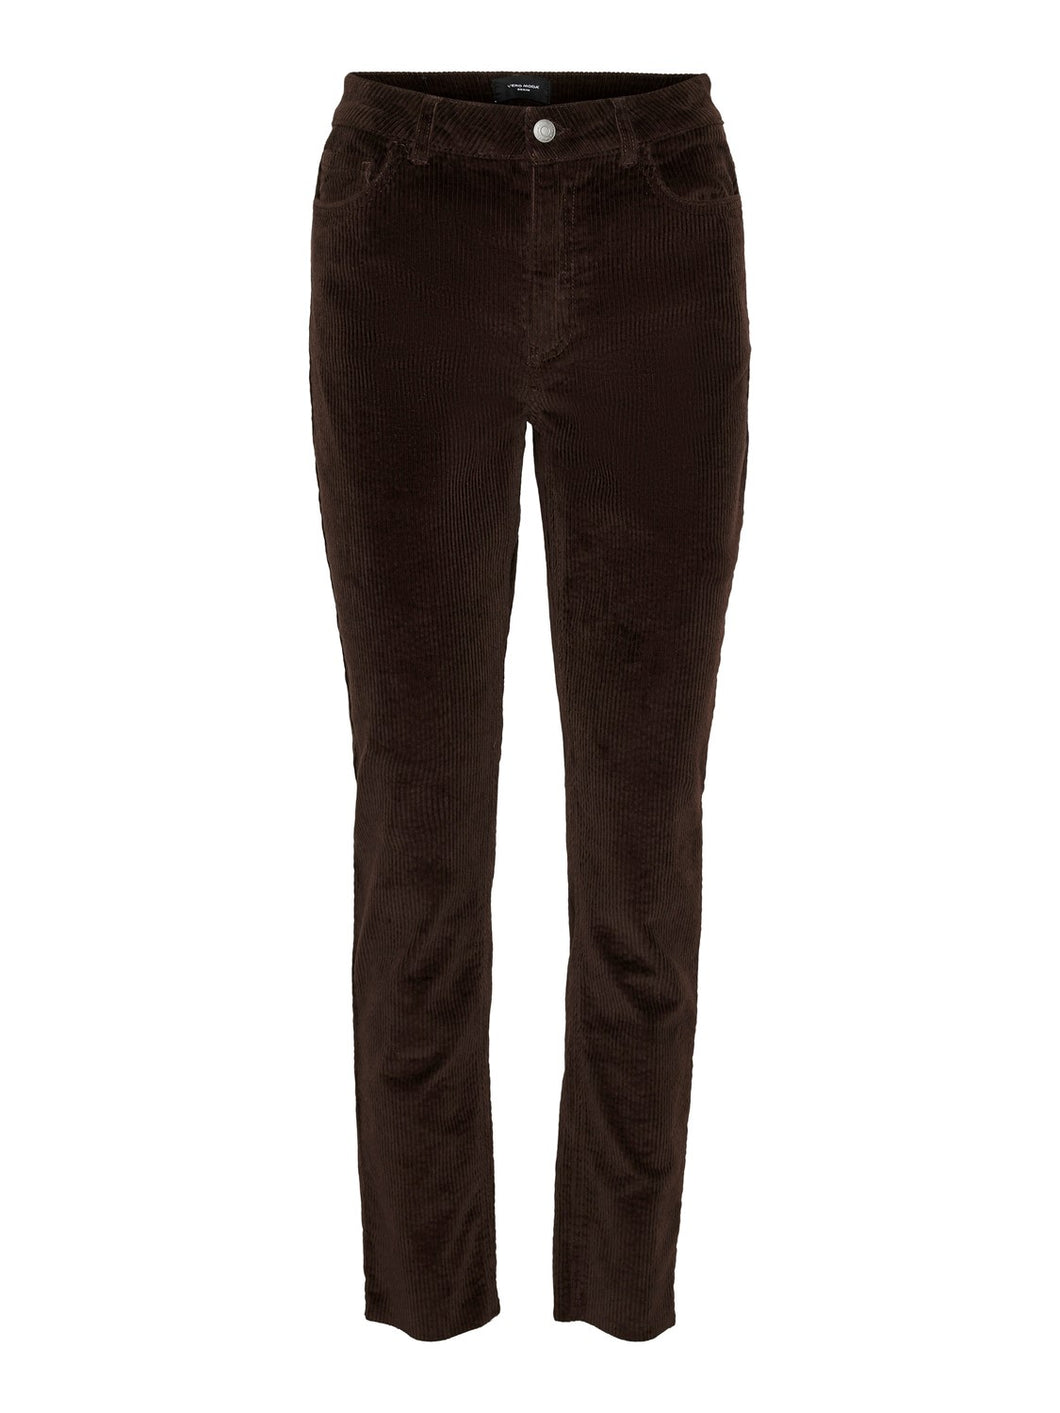 ONLINE ONLY Brenda Corded Trousers Coffee Bean